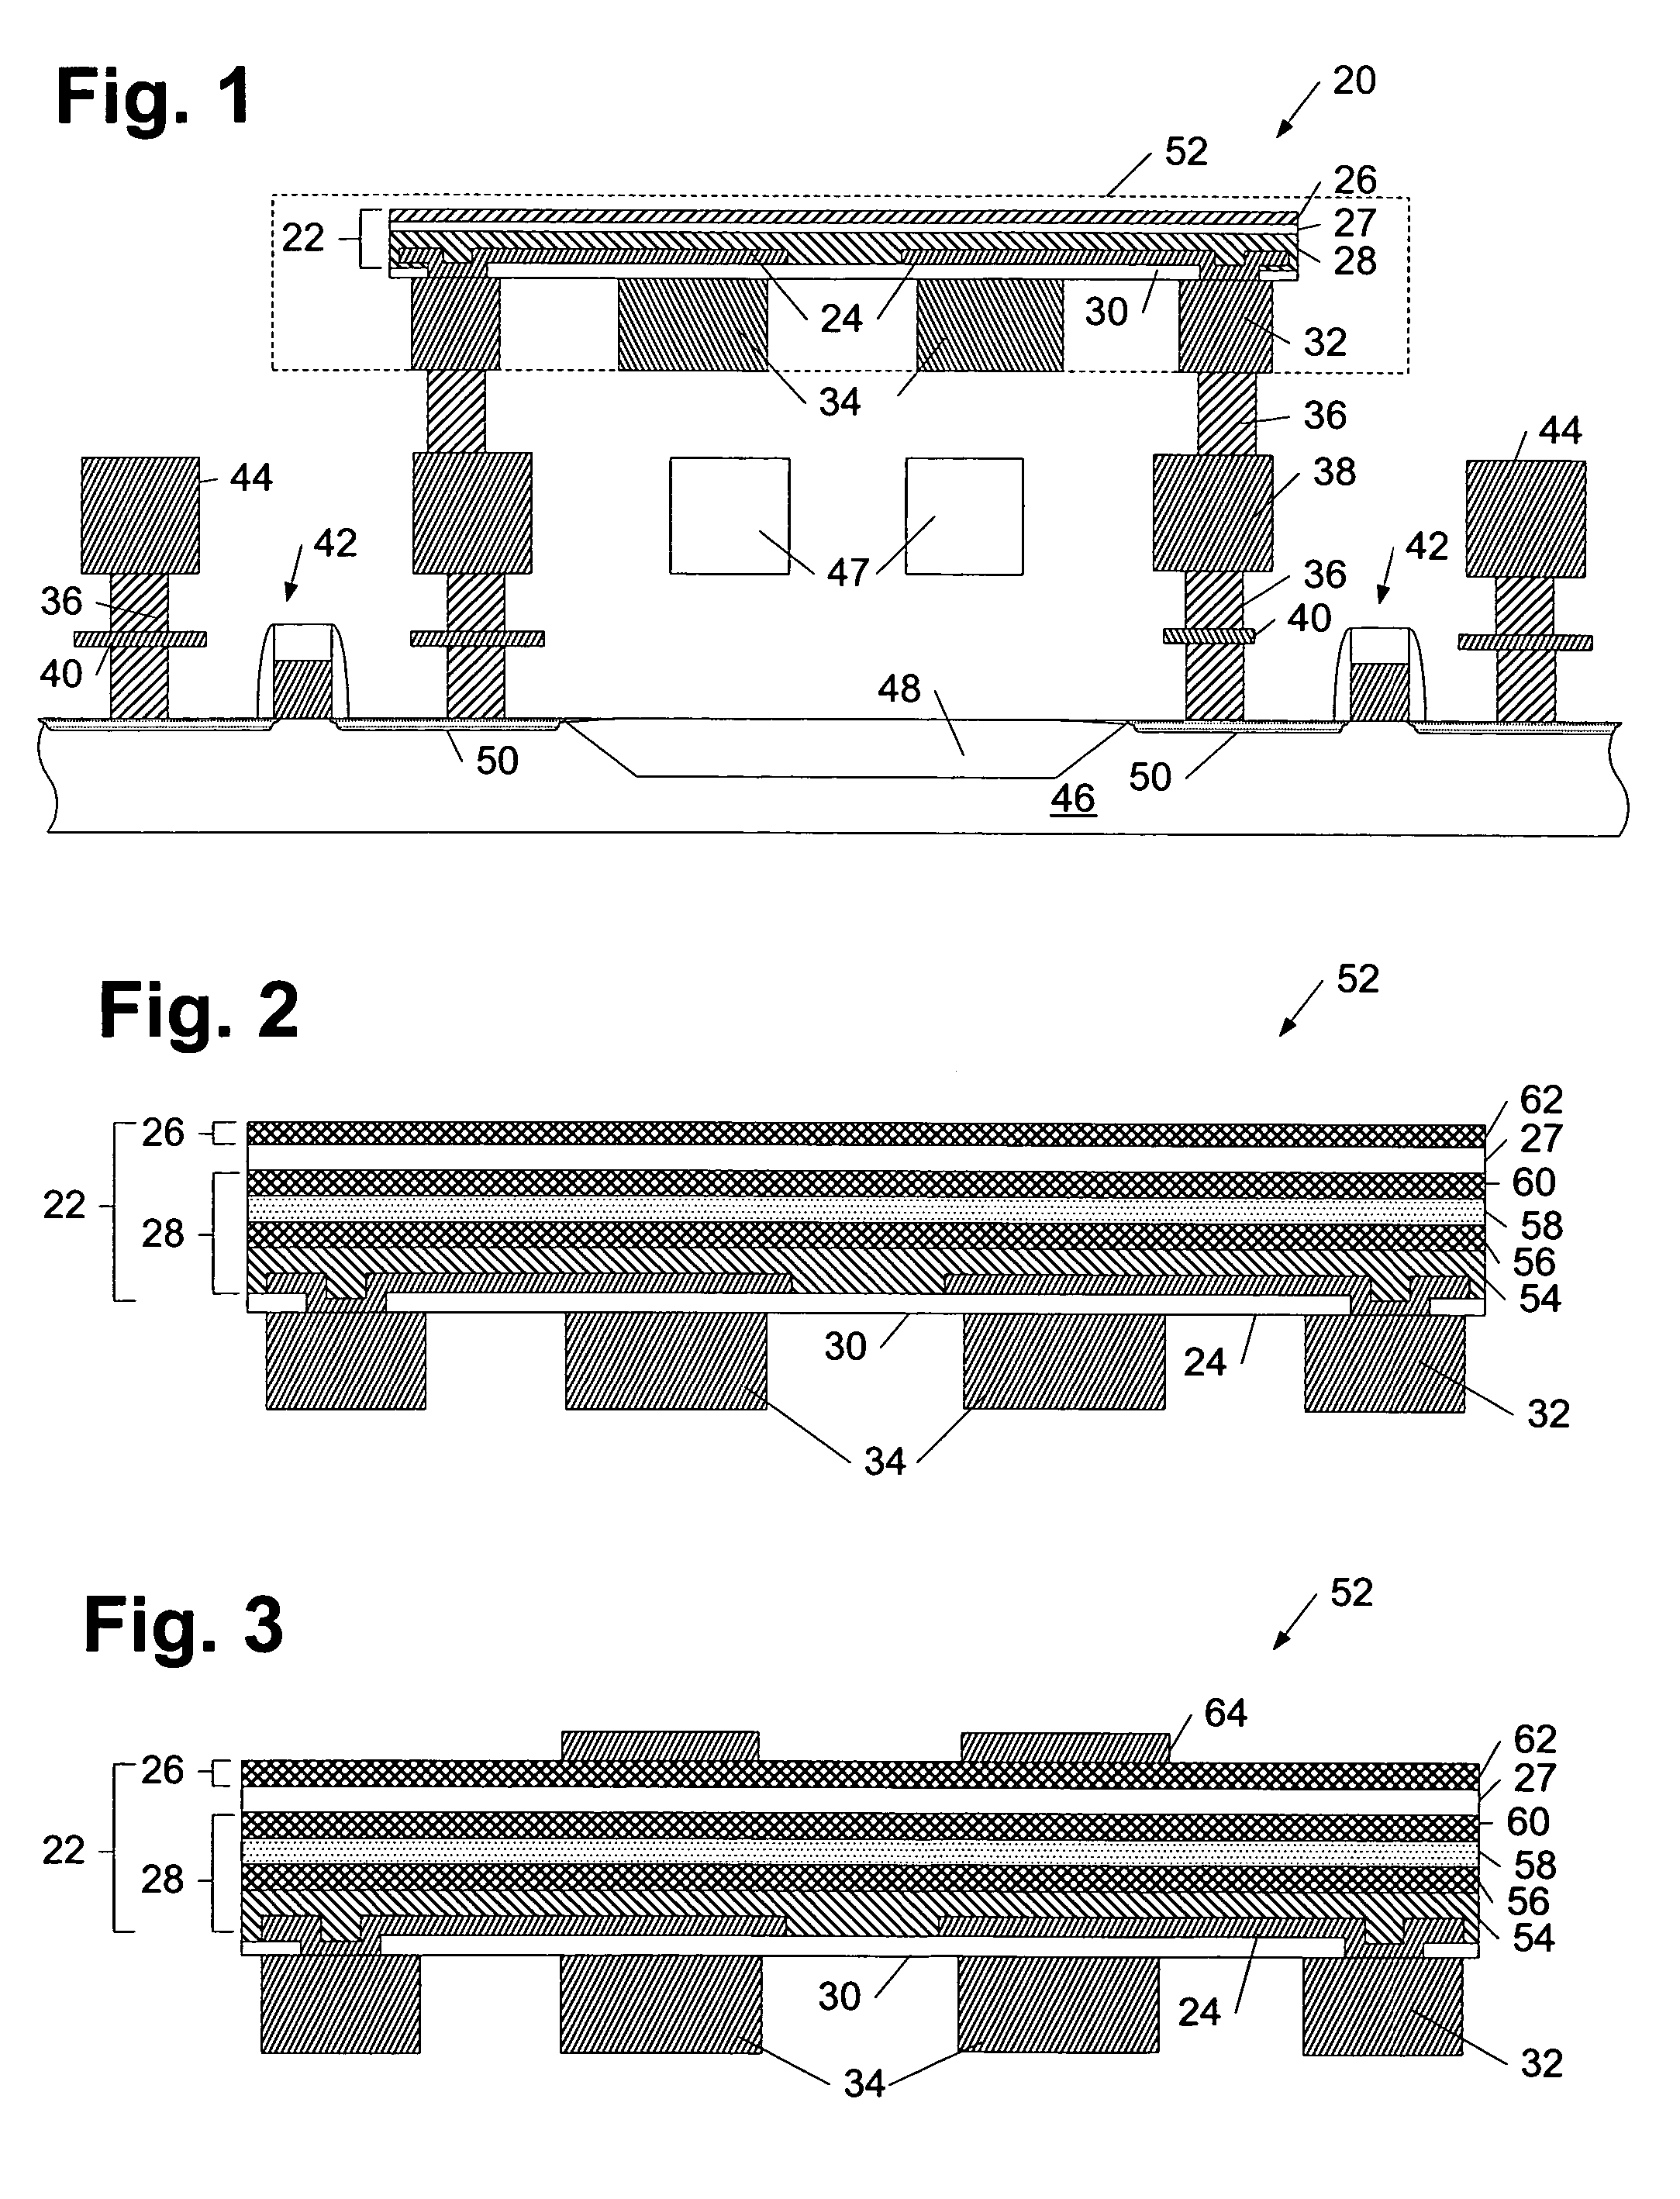 Magnetic memory cell junction and method for forming a magnetic memory cell junction